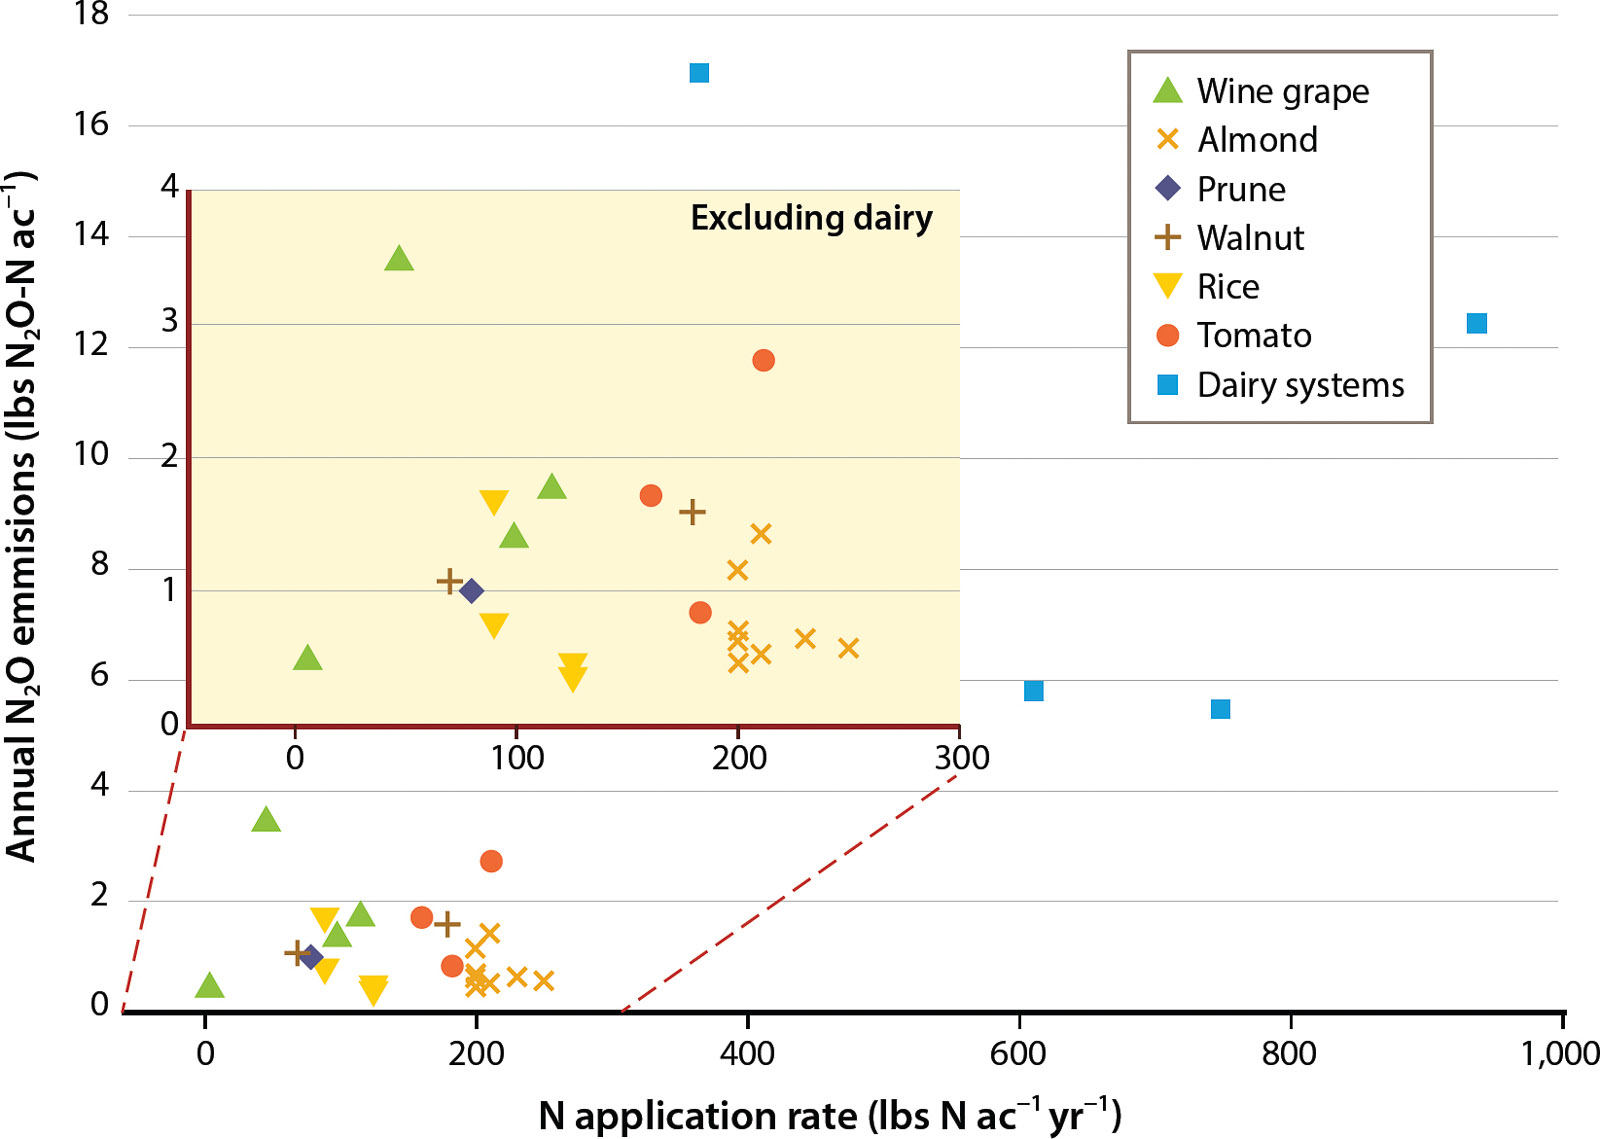 Annual nitrogen application rate versus annual N2O emissions by crop type. Dairy systems were defined by the production of forage or pasture with high manure N inputs; they include sites with pasture ryegrass, corn + forage mix, corn + winter wheat, corn + ryegrass.